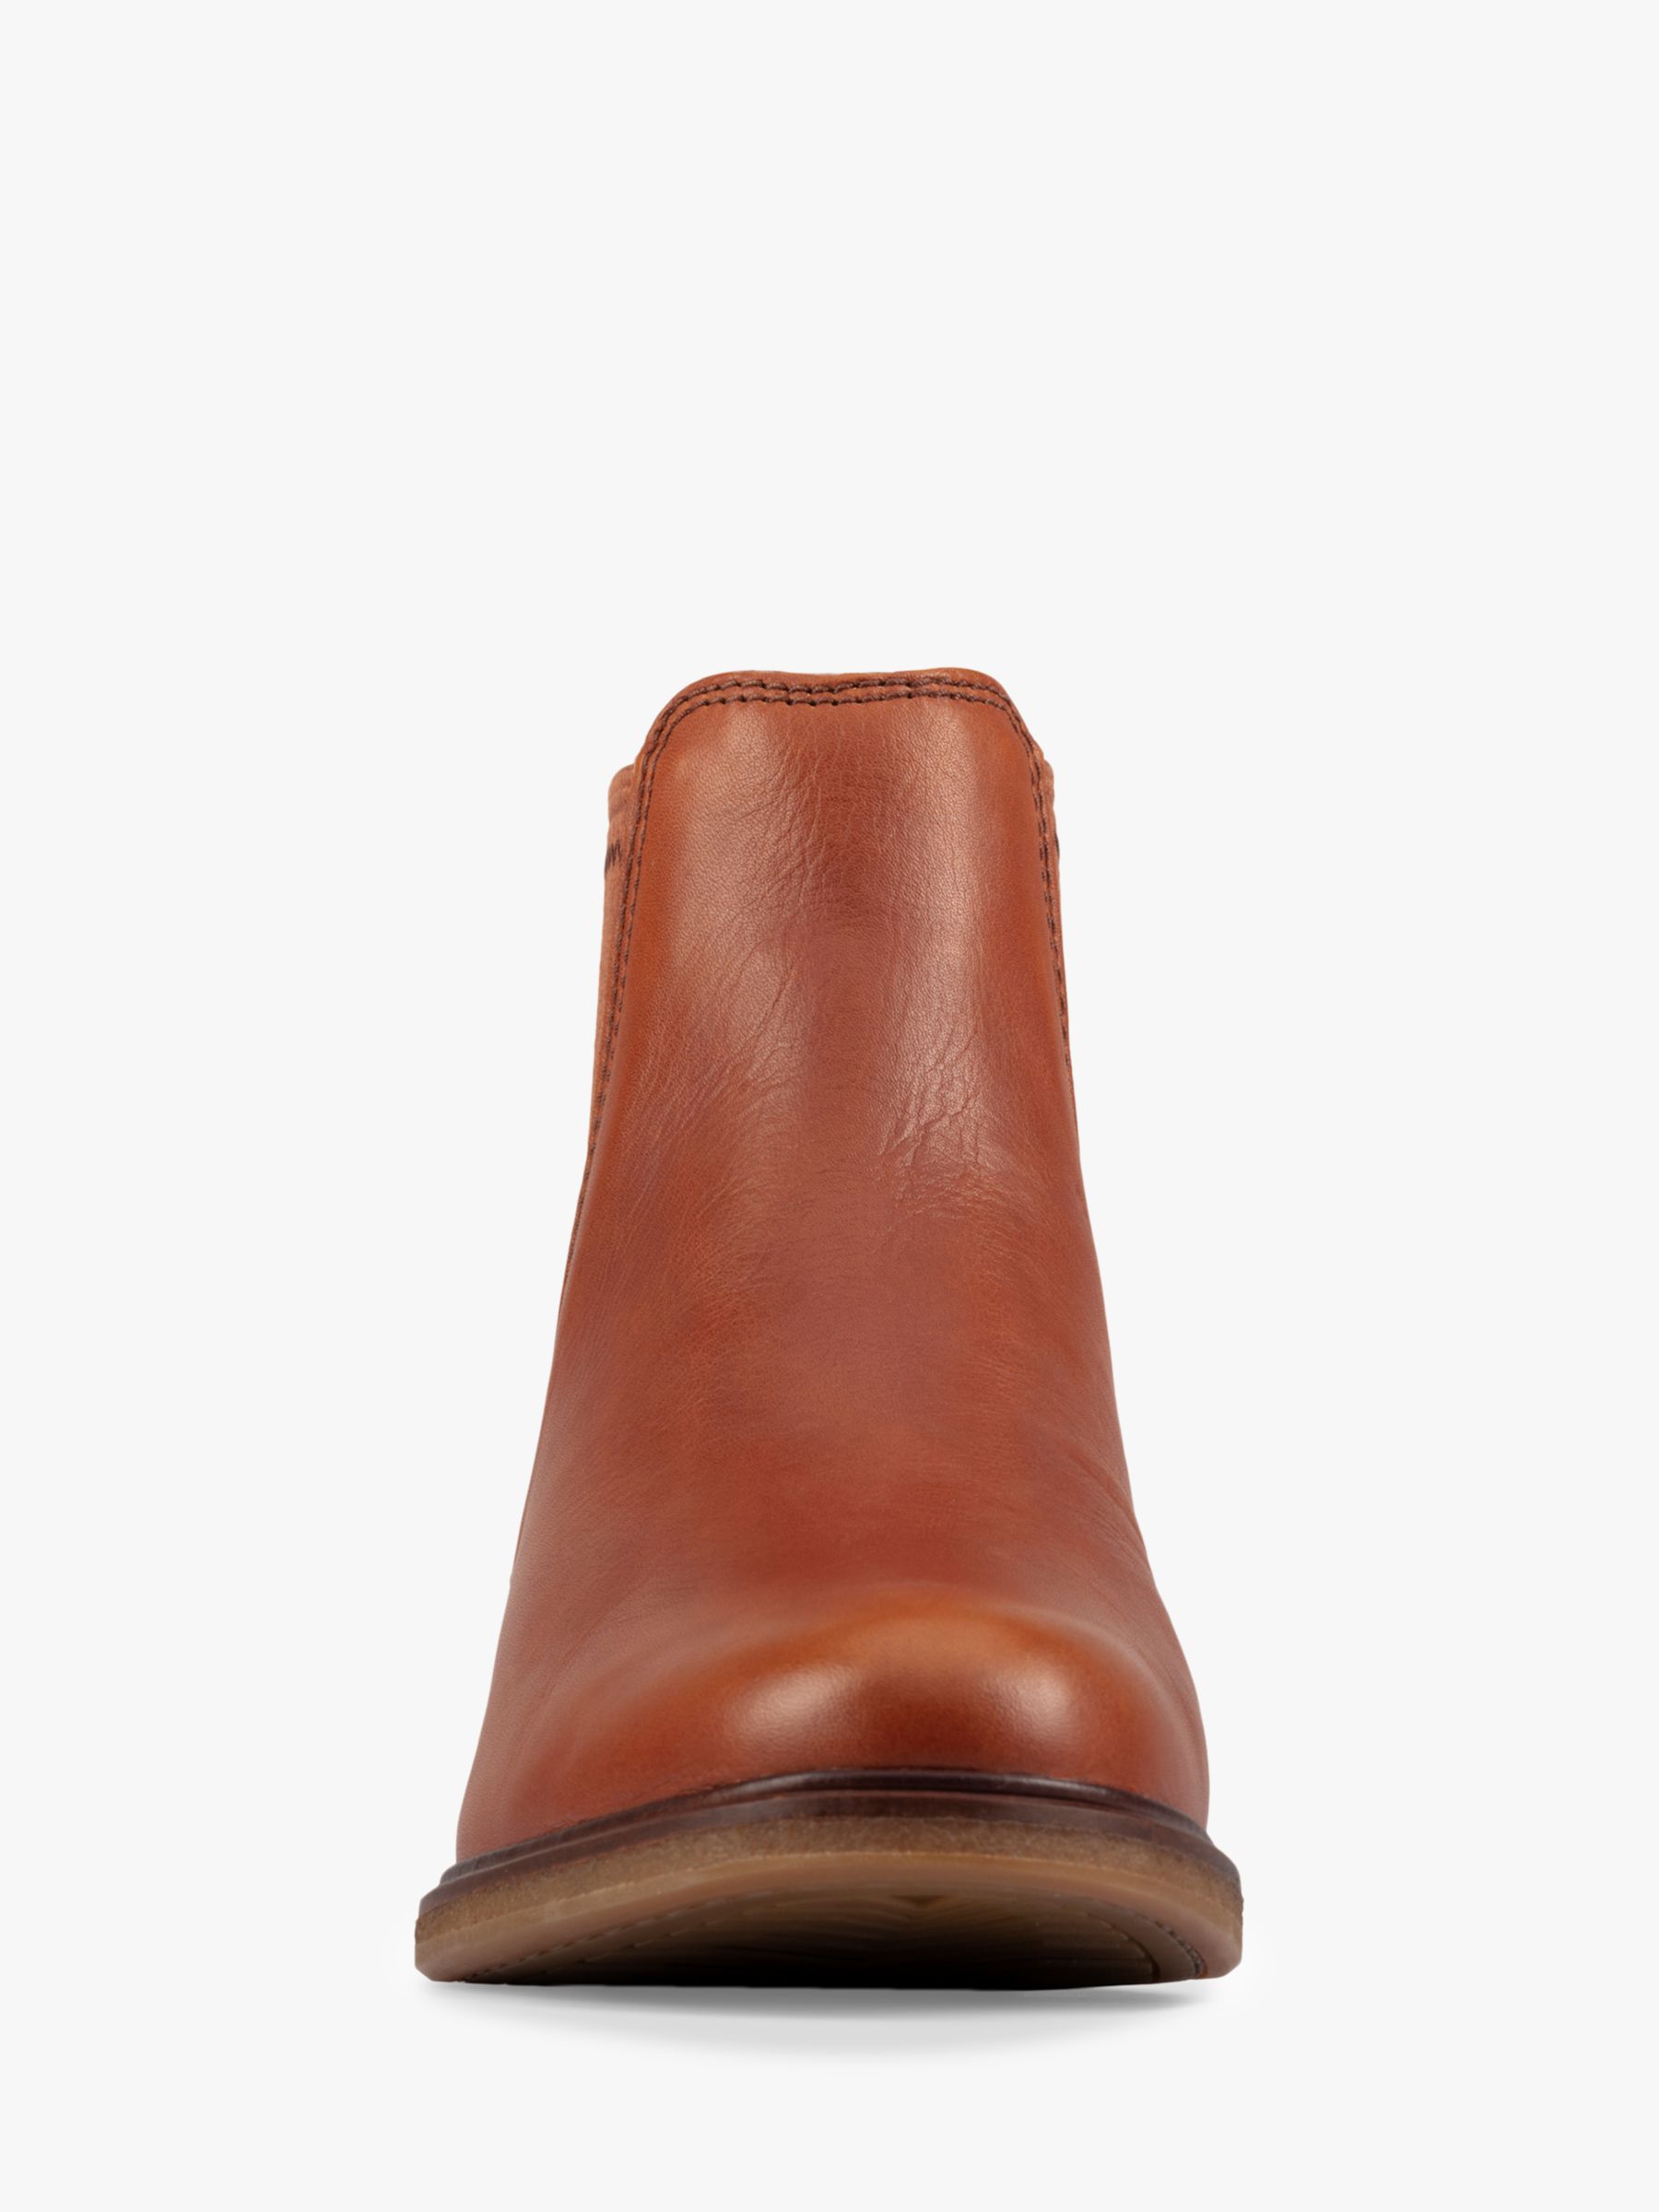 Clarks Clarkdale Arlo Leather Chelsea Boots, Tan at John Lewis & Partners